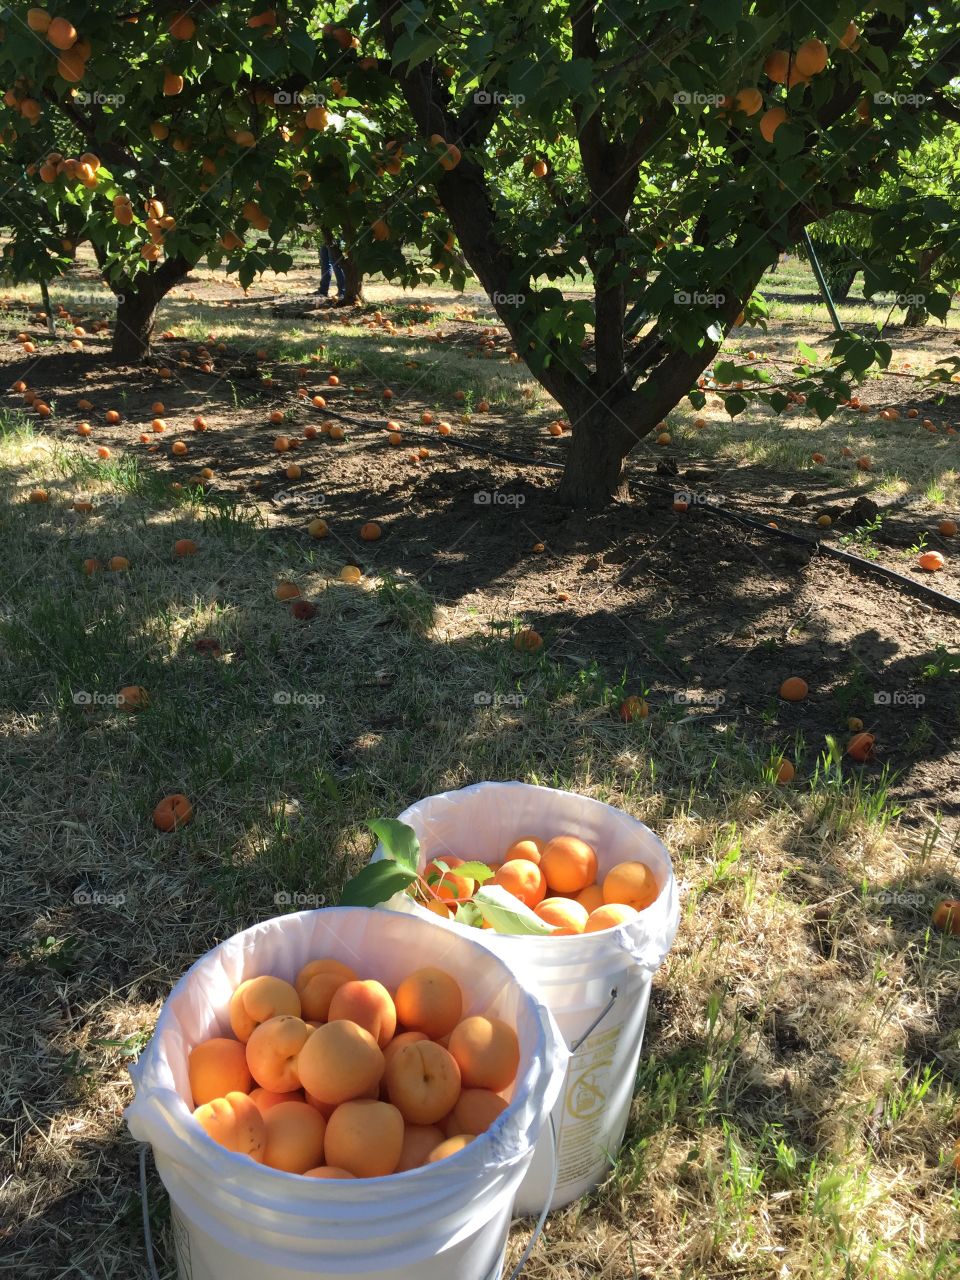 Brentwood, California, Farming, Harvesting, Trees, In a Line, Summer, Summer Afternoon, Orchard, North Bay, CA, Blooming, Fruits, Apricots, Sunny, Harvest Time, Produce, Picking, Nature Produce to be enjoyed, Gathered, Pile, Shade, Bucket of Apricots